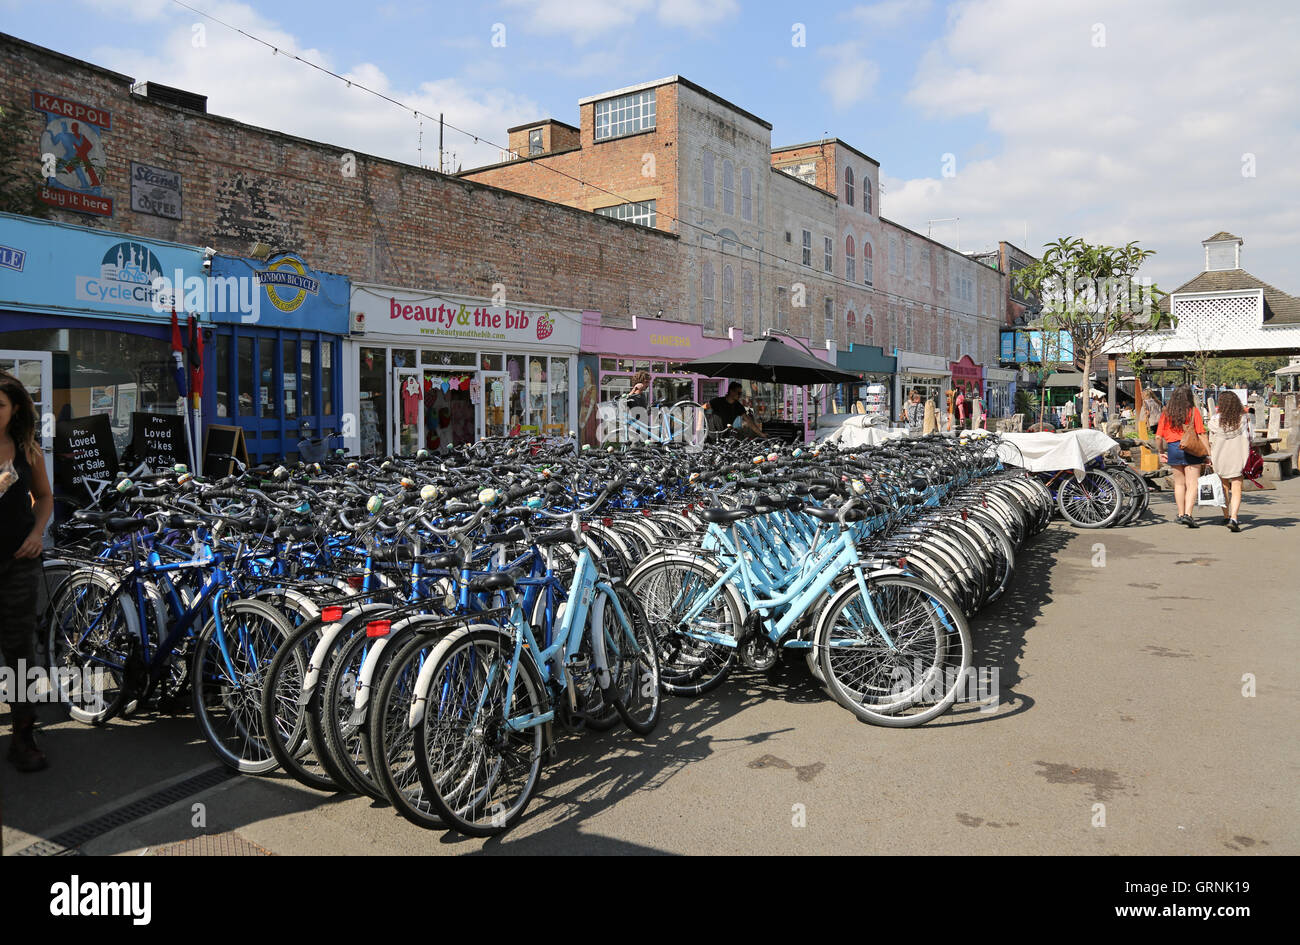 Bike hire shop at Gabriel's Wharf, close to the River Thames in London. Shows a large number of bicycles for hire. Stock Photo